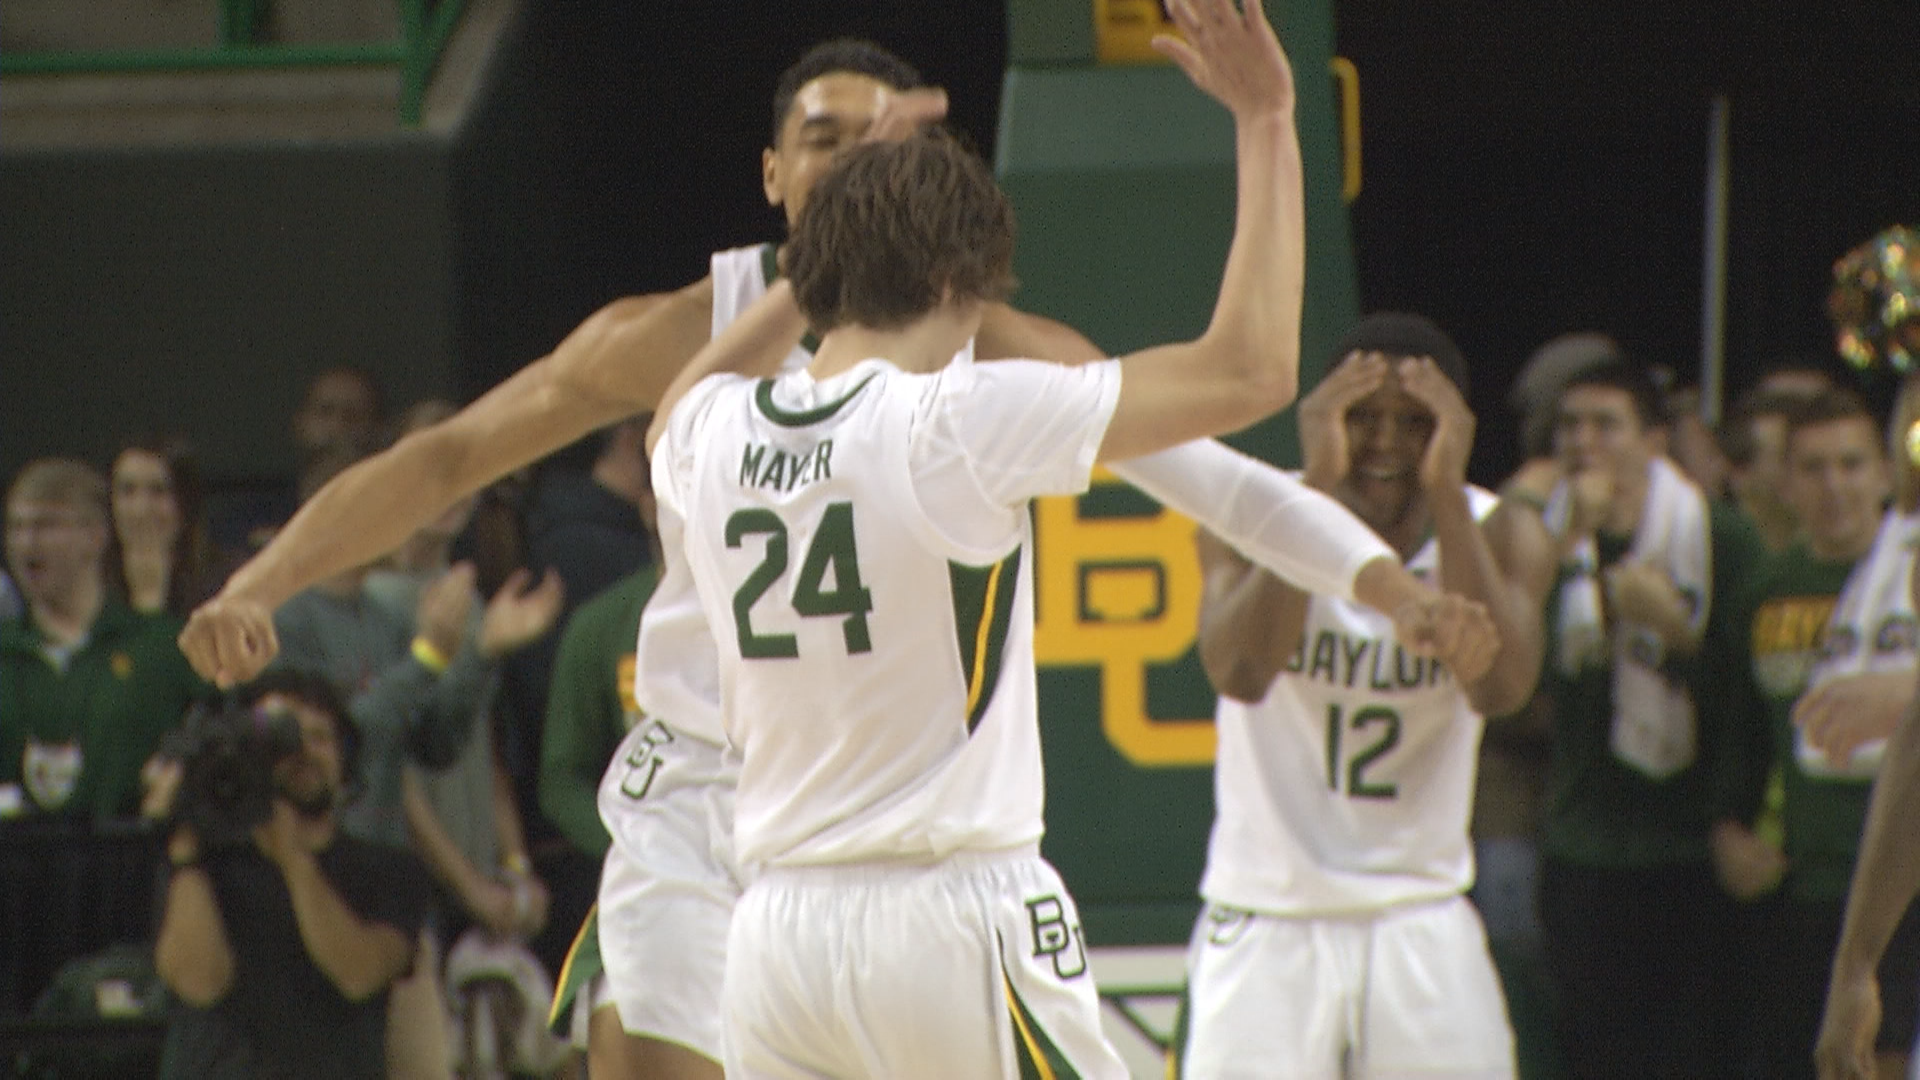 Baylor knotched its 22nd-straight win, moving to 12-0 in conference play for the first time in program history.